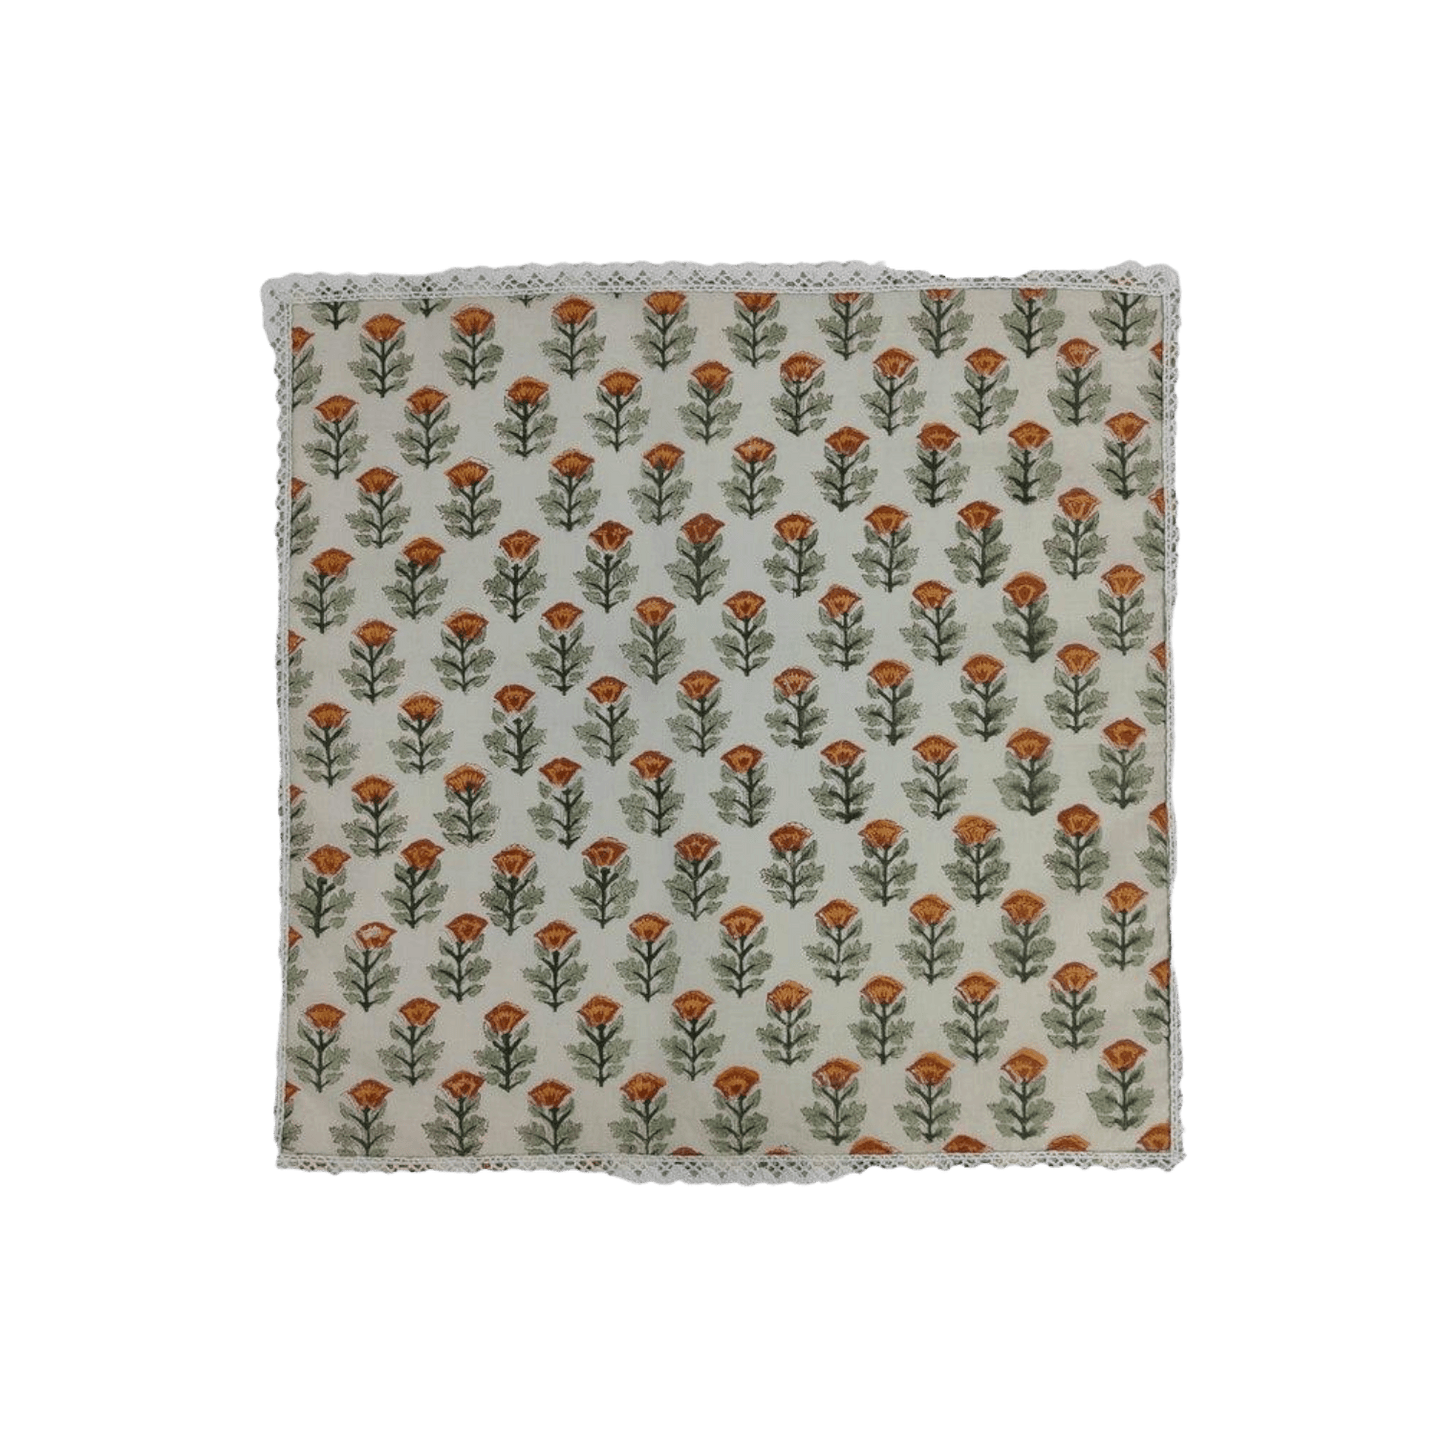 Beige Spring Floral Hand Block Printed Cotton Napkins - MAIA HOMES